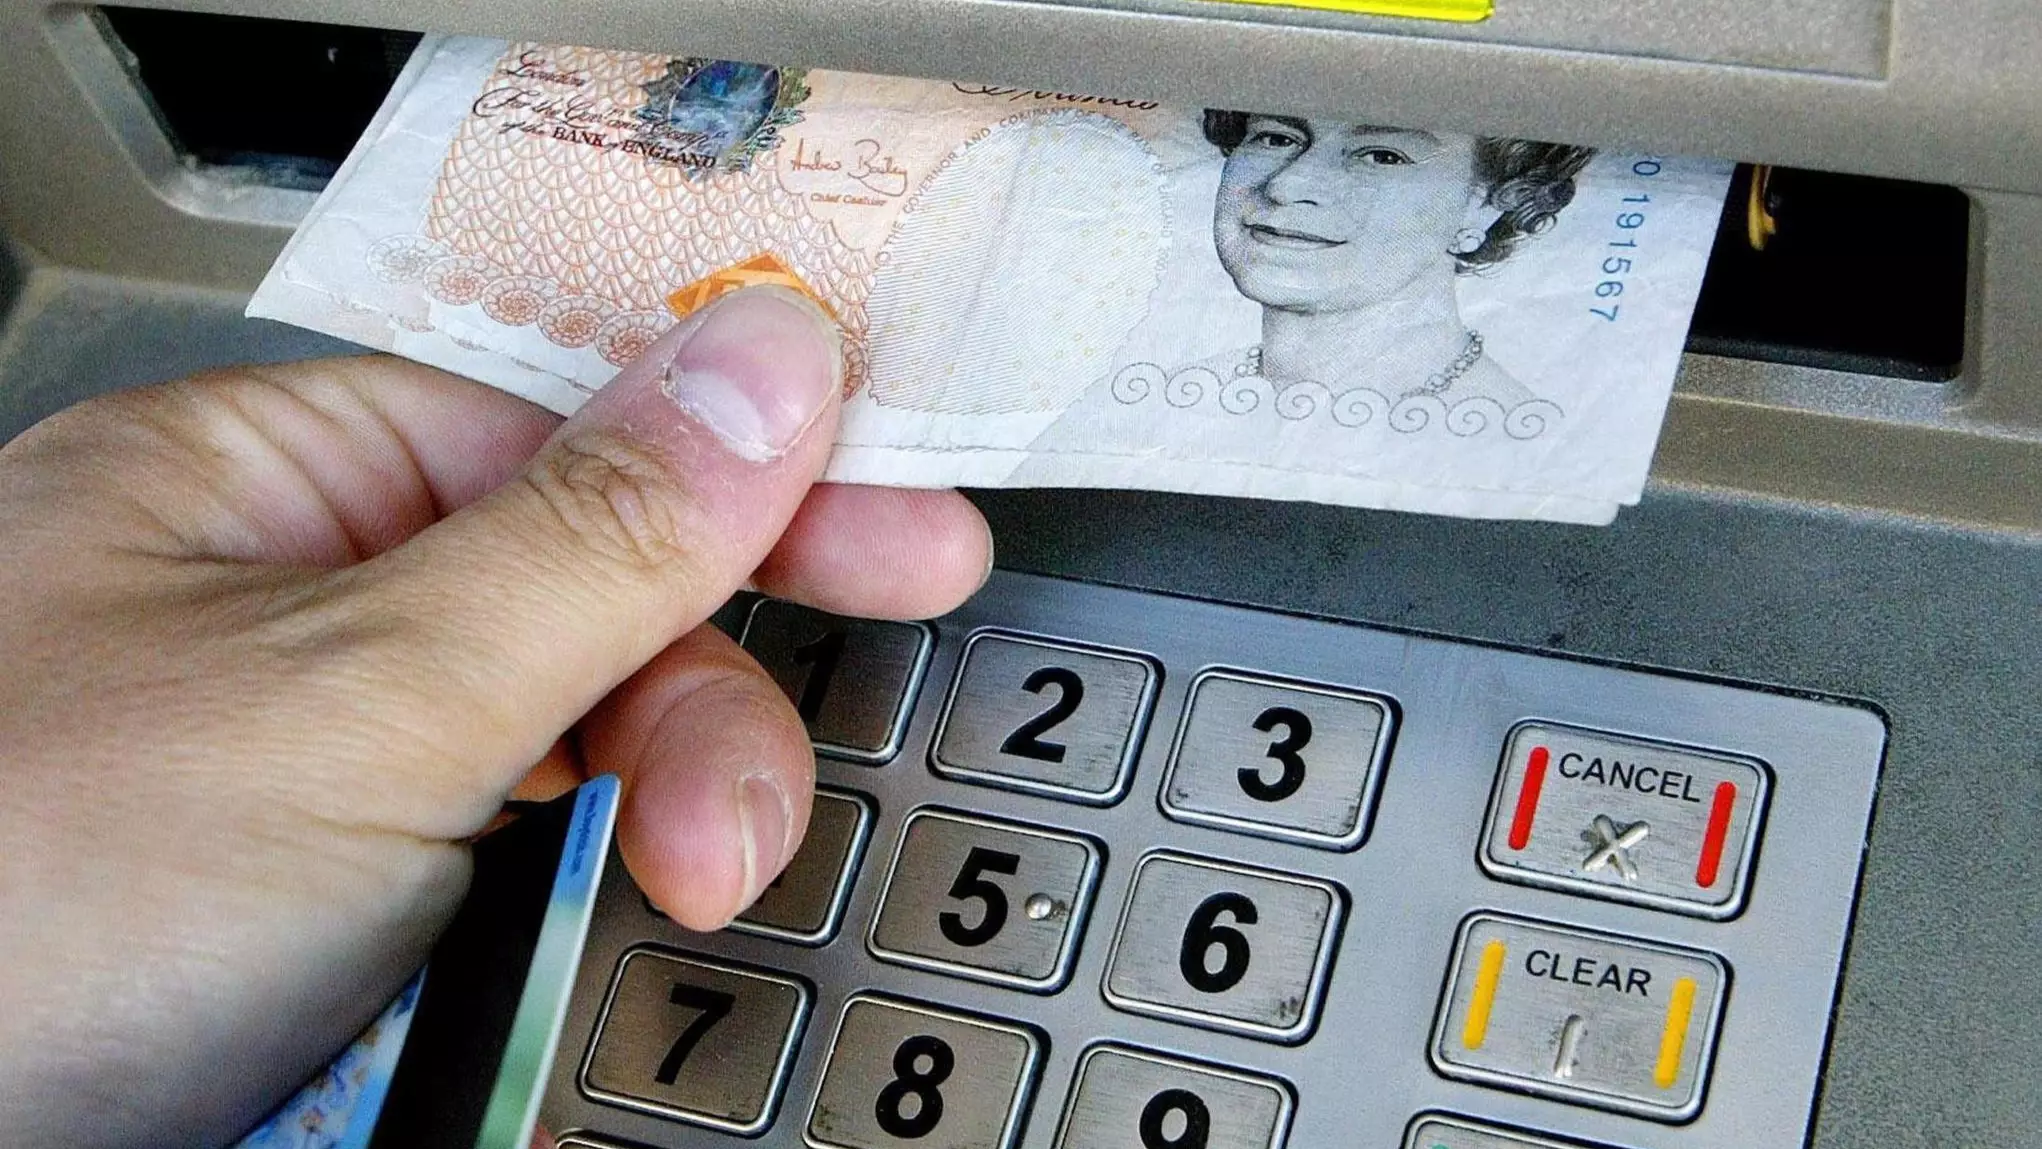 Thousands Of ATM Machines To Start Charging 95p For Cash Withdrawals 